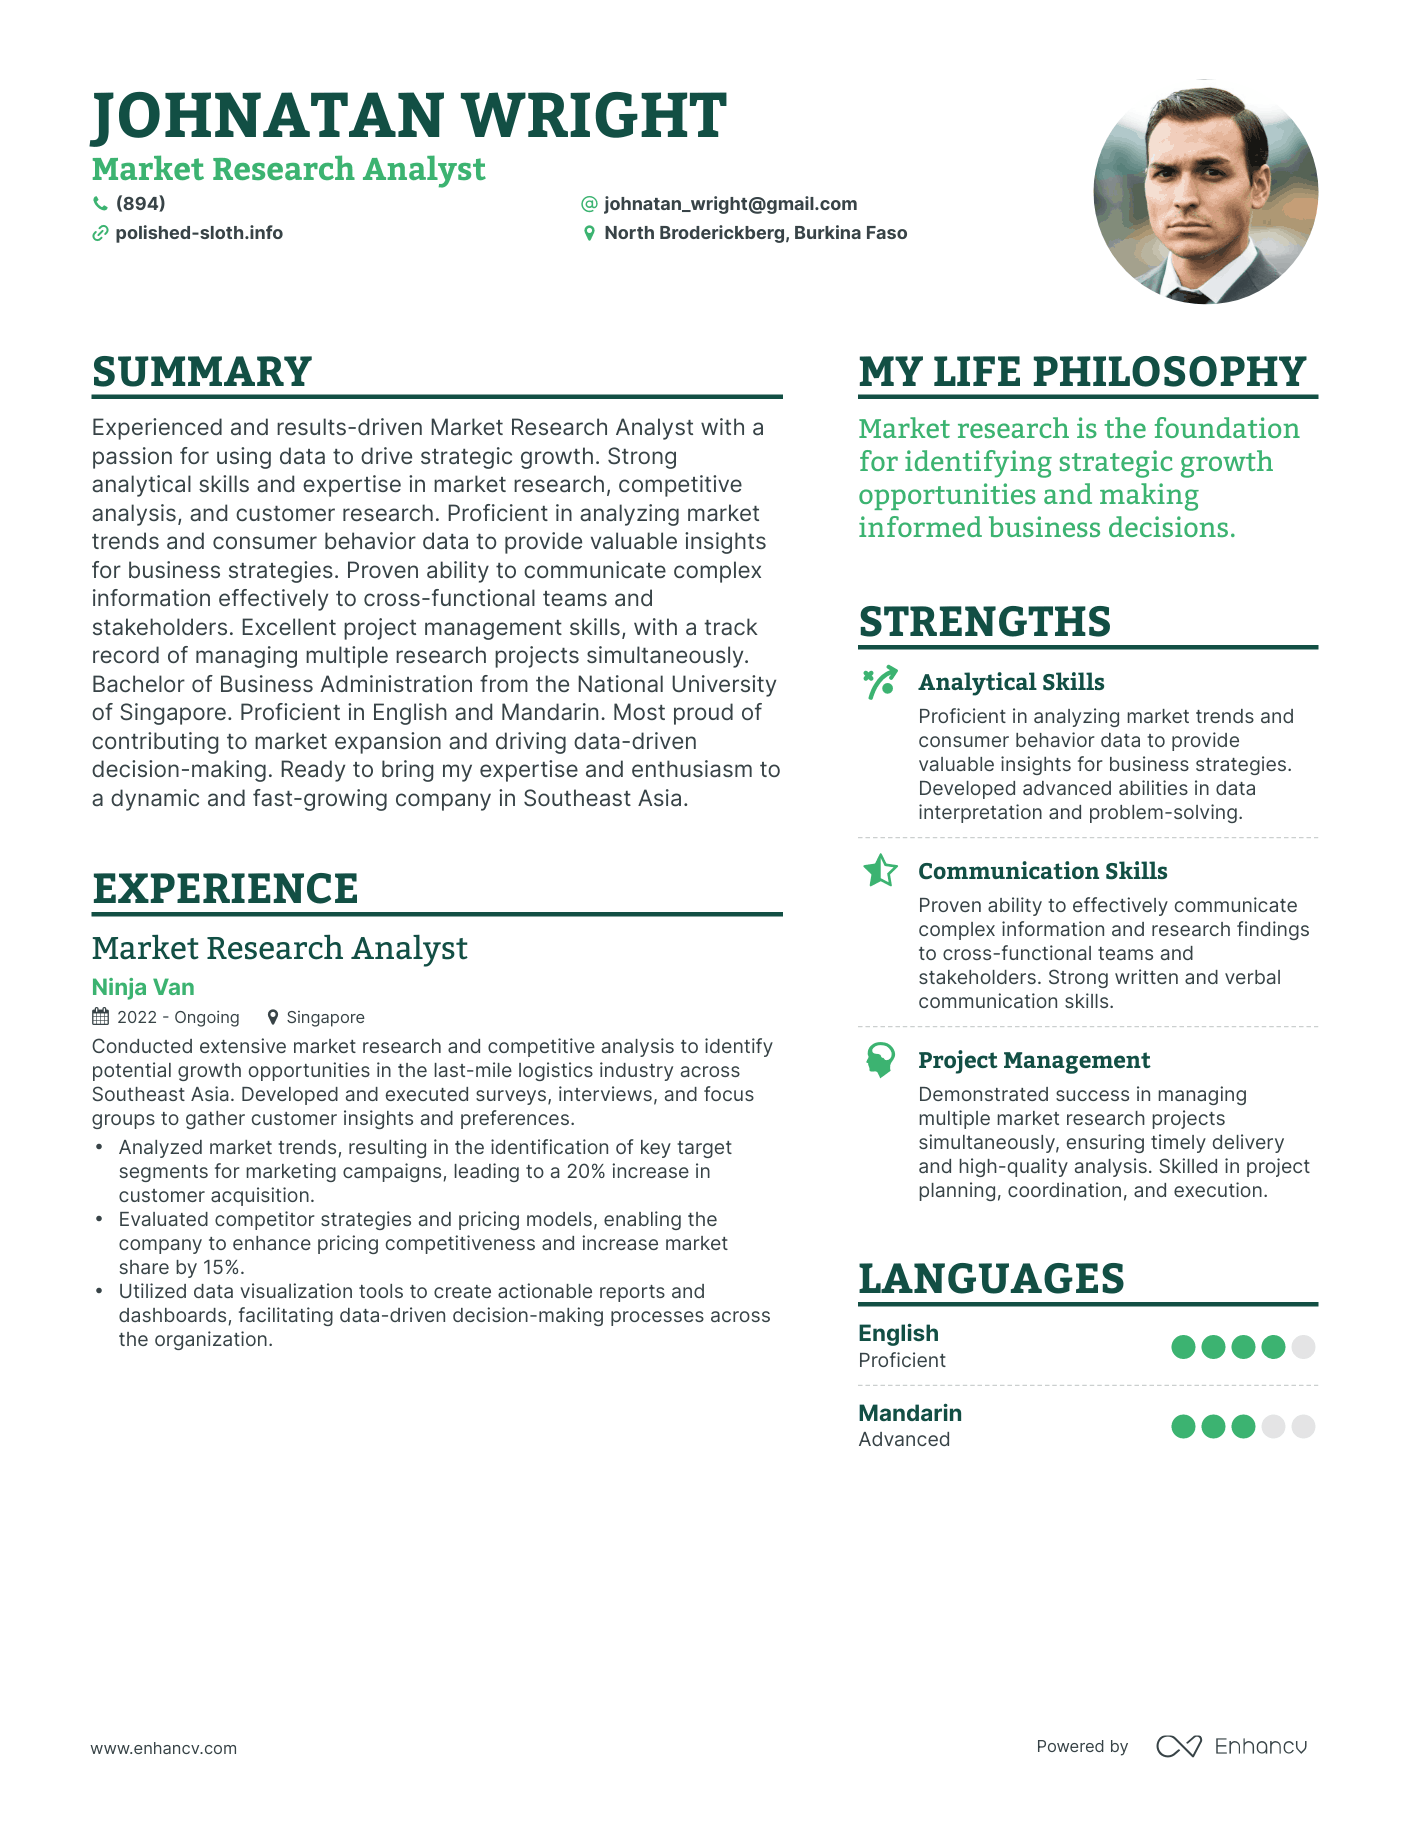 Market Research Analyst resume example